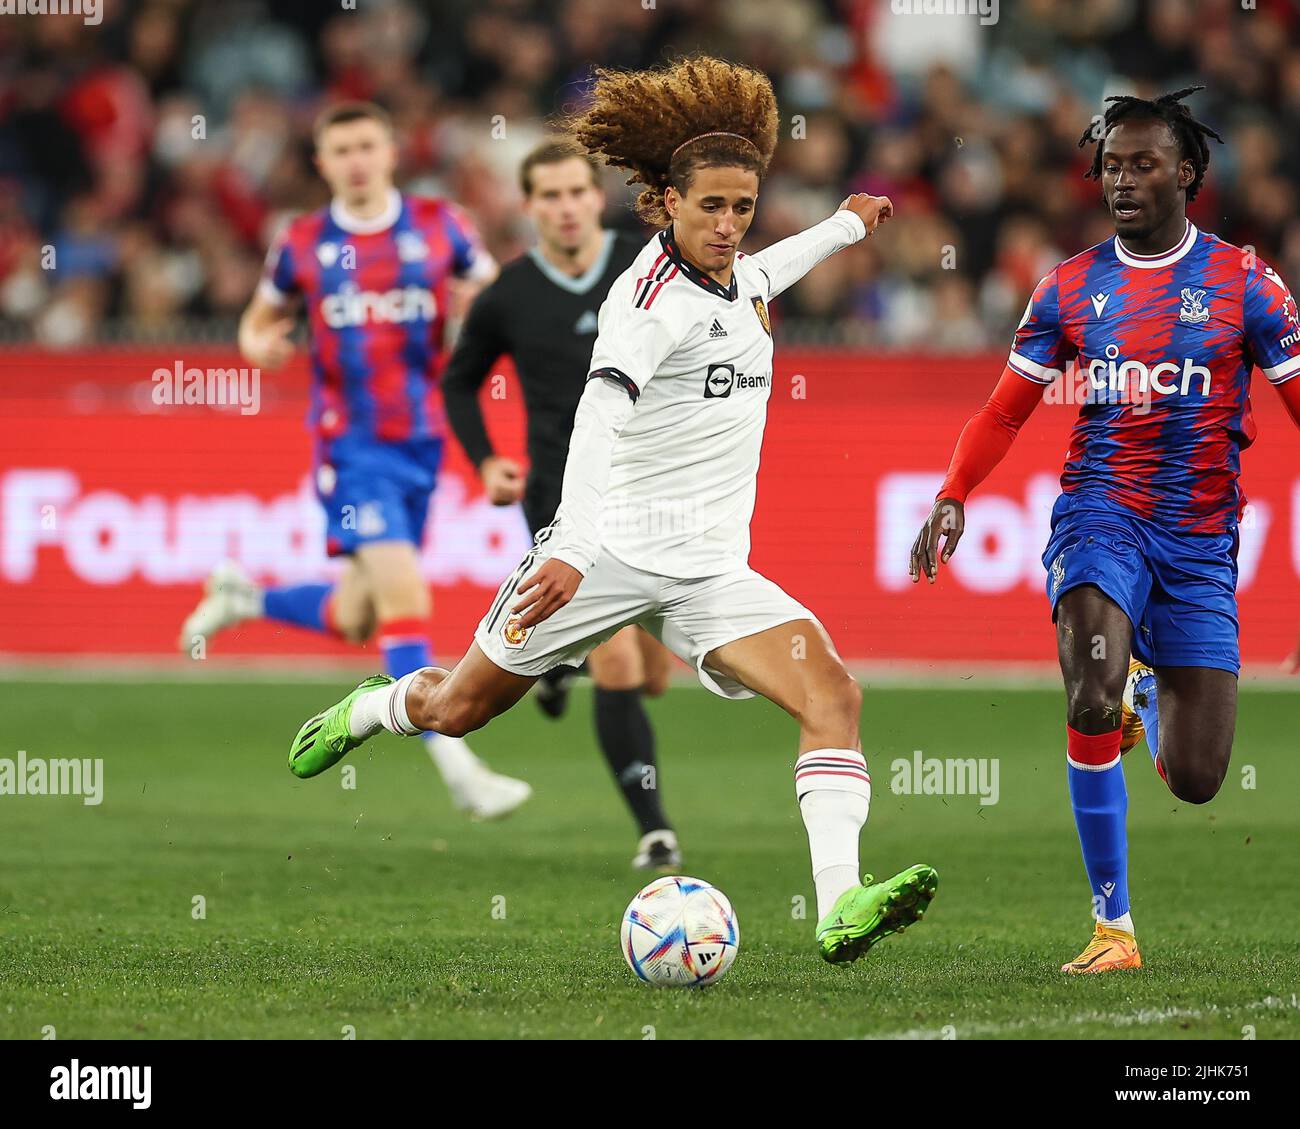 Hannibal Mejbri (46) of Manchester United shoots on goal in, on 7/19/2022. (Photo by Patrick Hoelscher/News Images/Sipa USA) Credit: Sipa USA/Alamy Live News Stock Photo